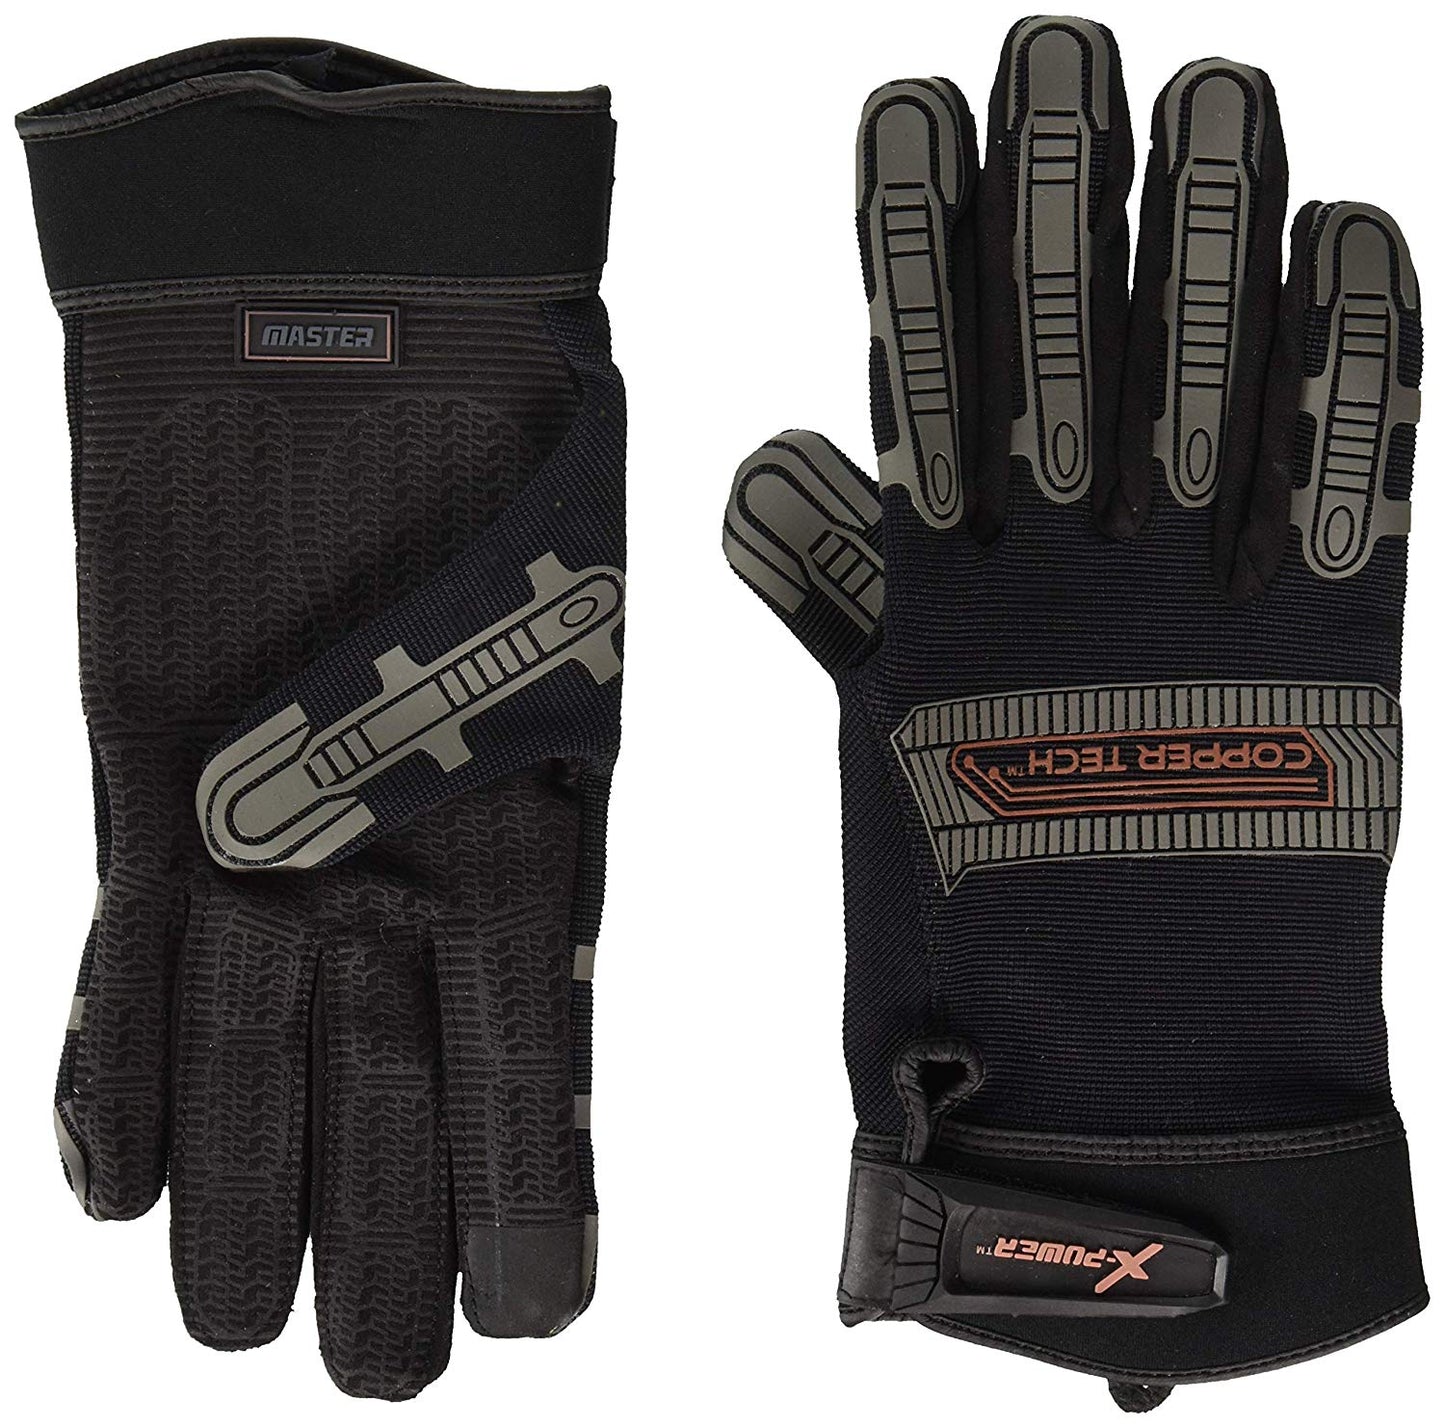 Copper Infused Workman/Mechanic Gloves - MASTER (PAIR)